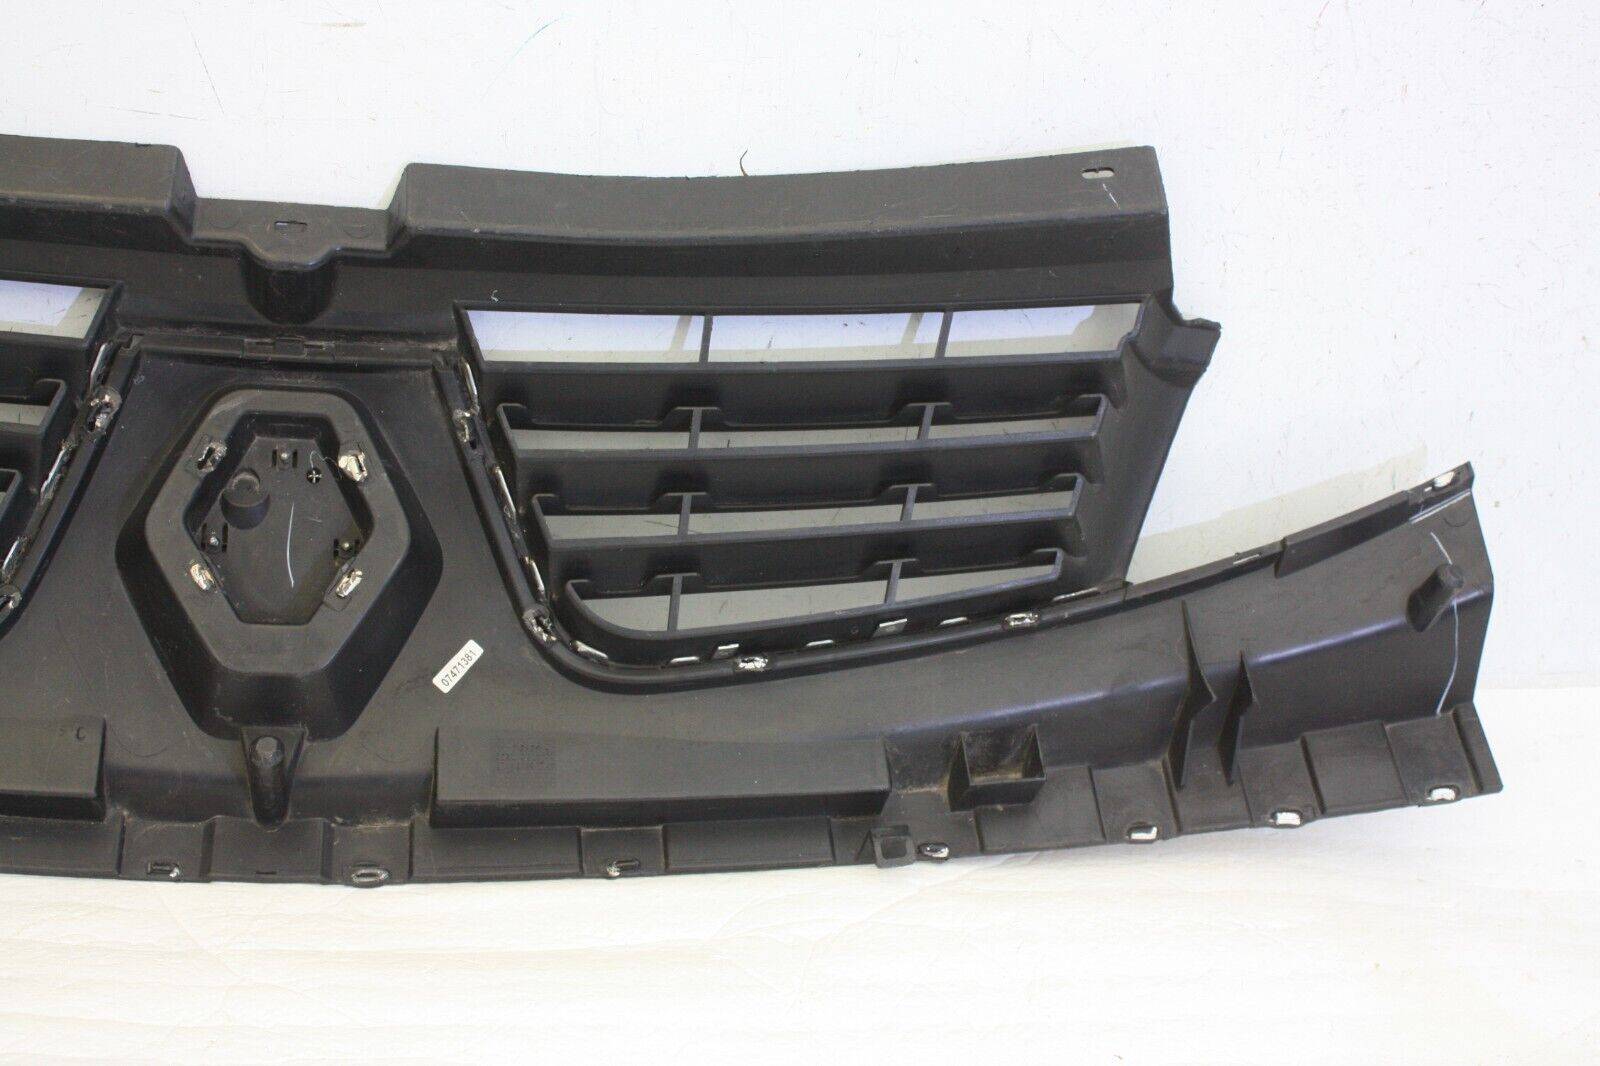 Renault-Trafic-Front-Bumper-Upper-Section-Grill-2007-TO-2014-623100247R-Genuine-176261013412-14